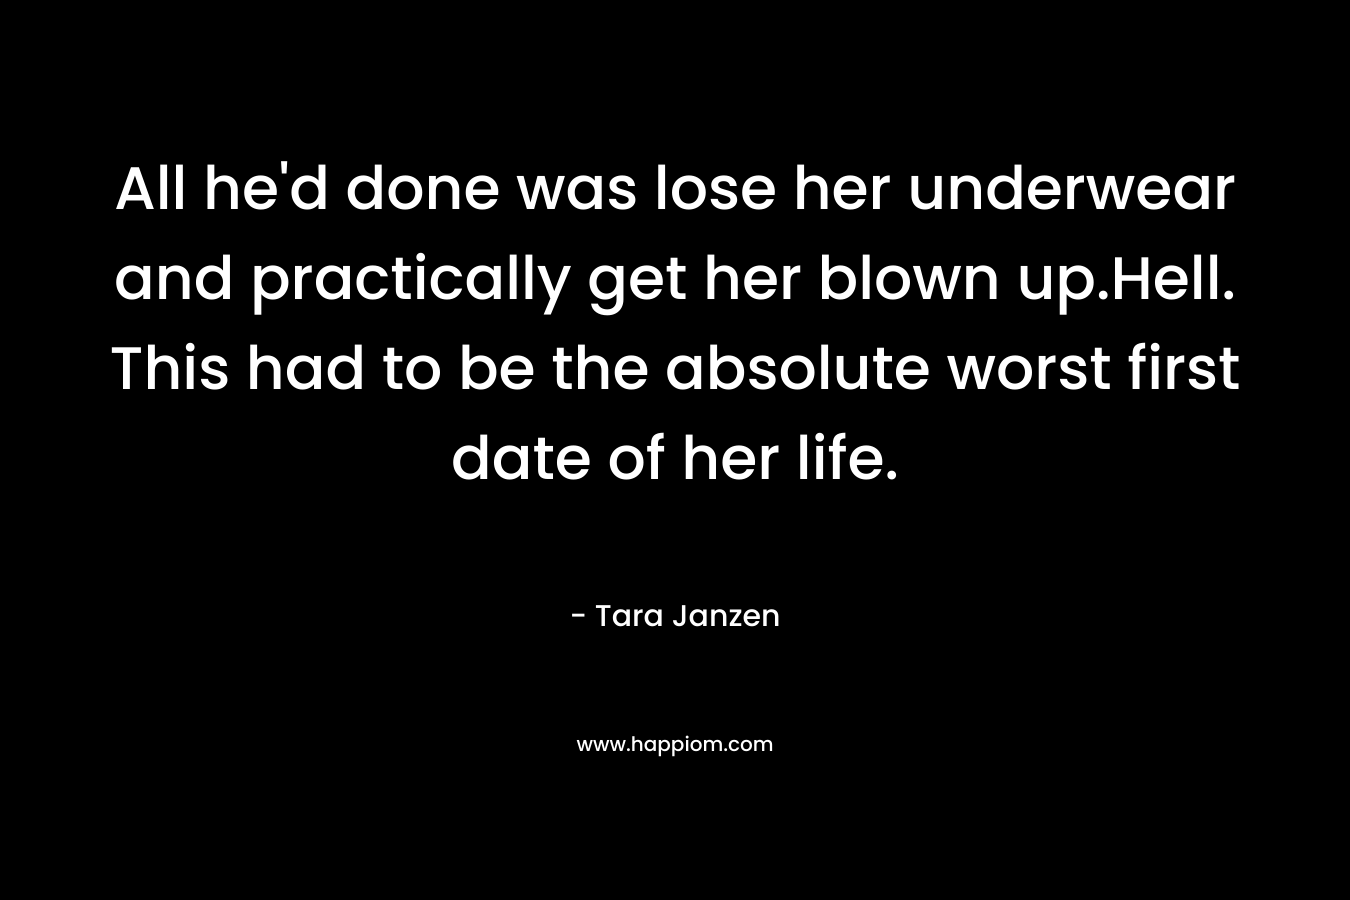 All he’d done was lose her underwear and practically get her blown up.Hell. This had to be the absolute worst first date of her life. – Tara Janzen